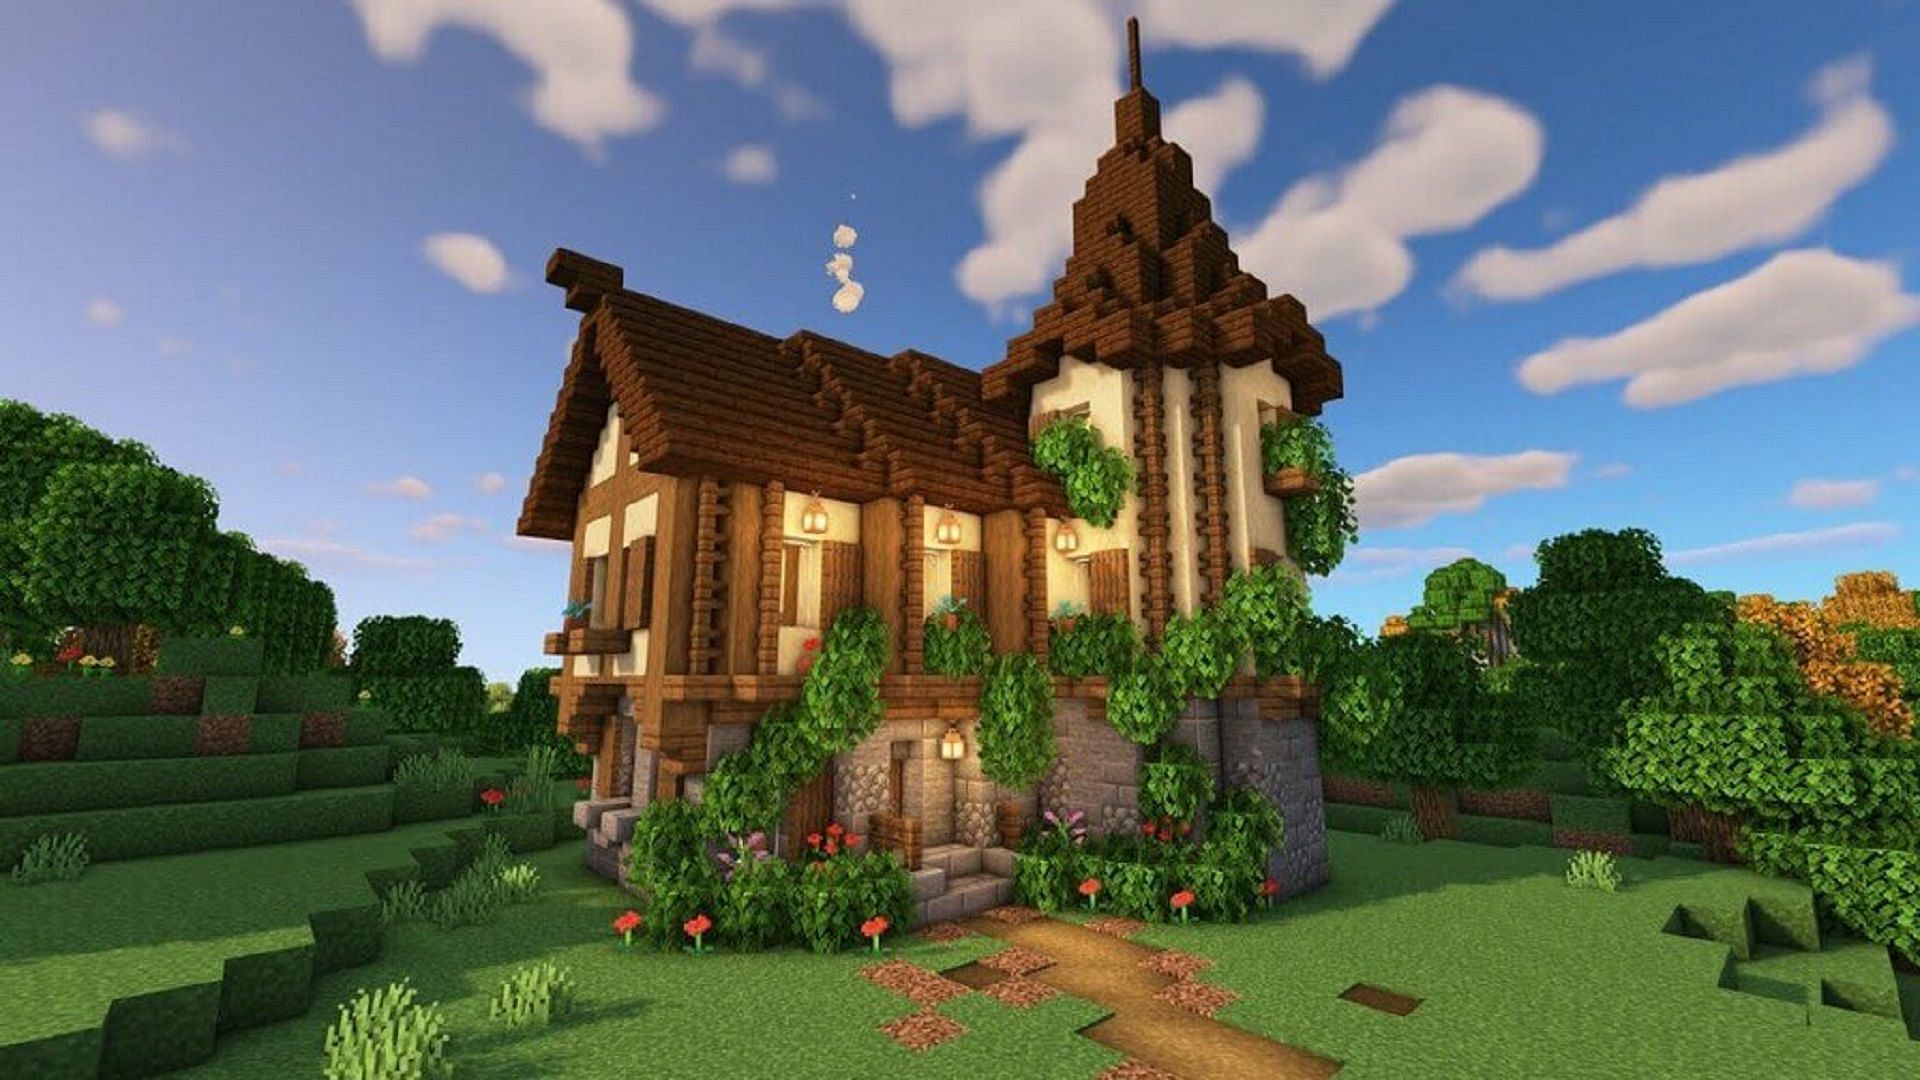 A medieval lodge home in Minecraft (Image via Mojang)